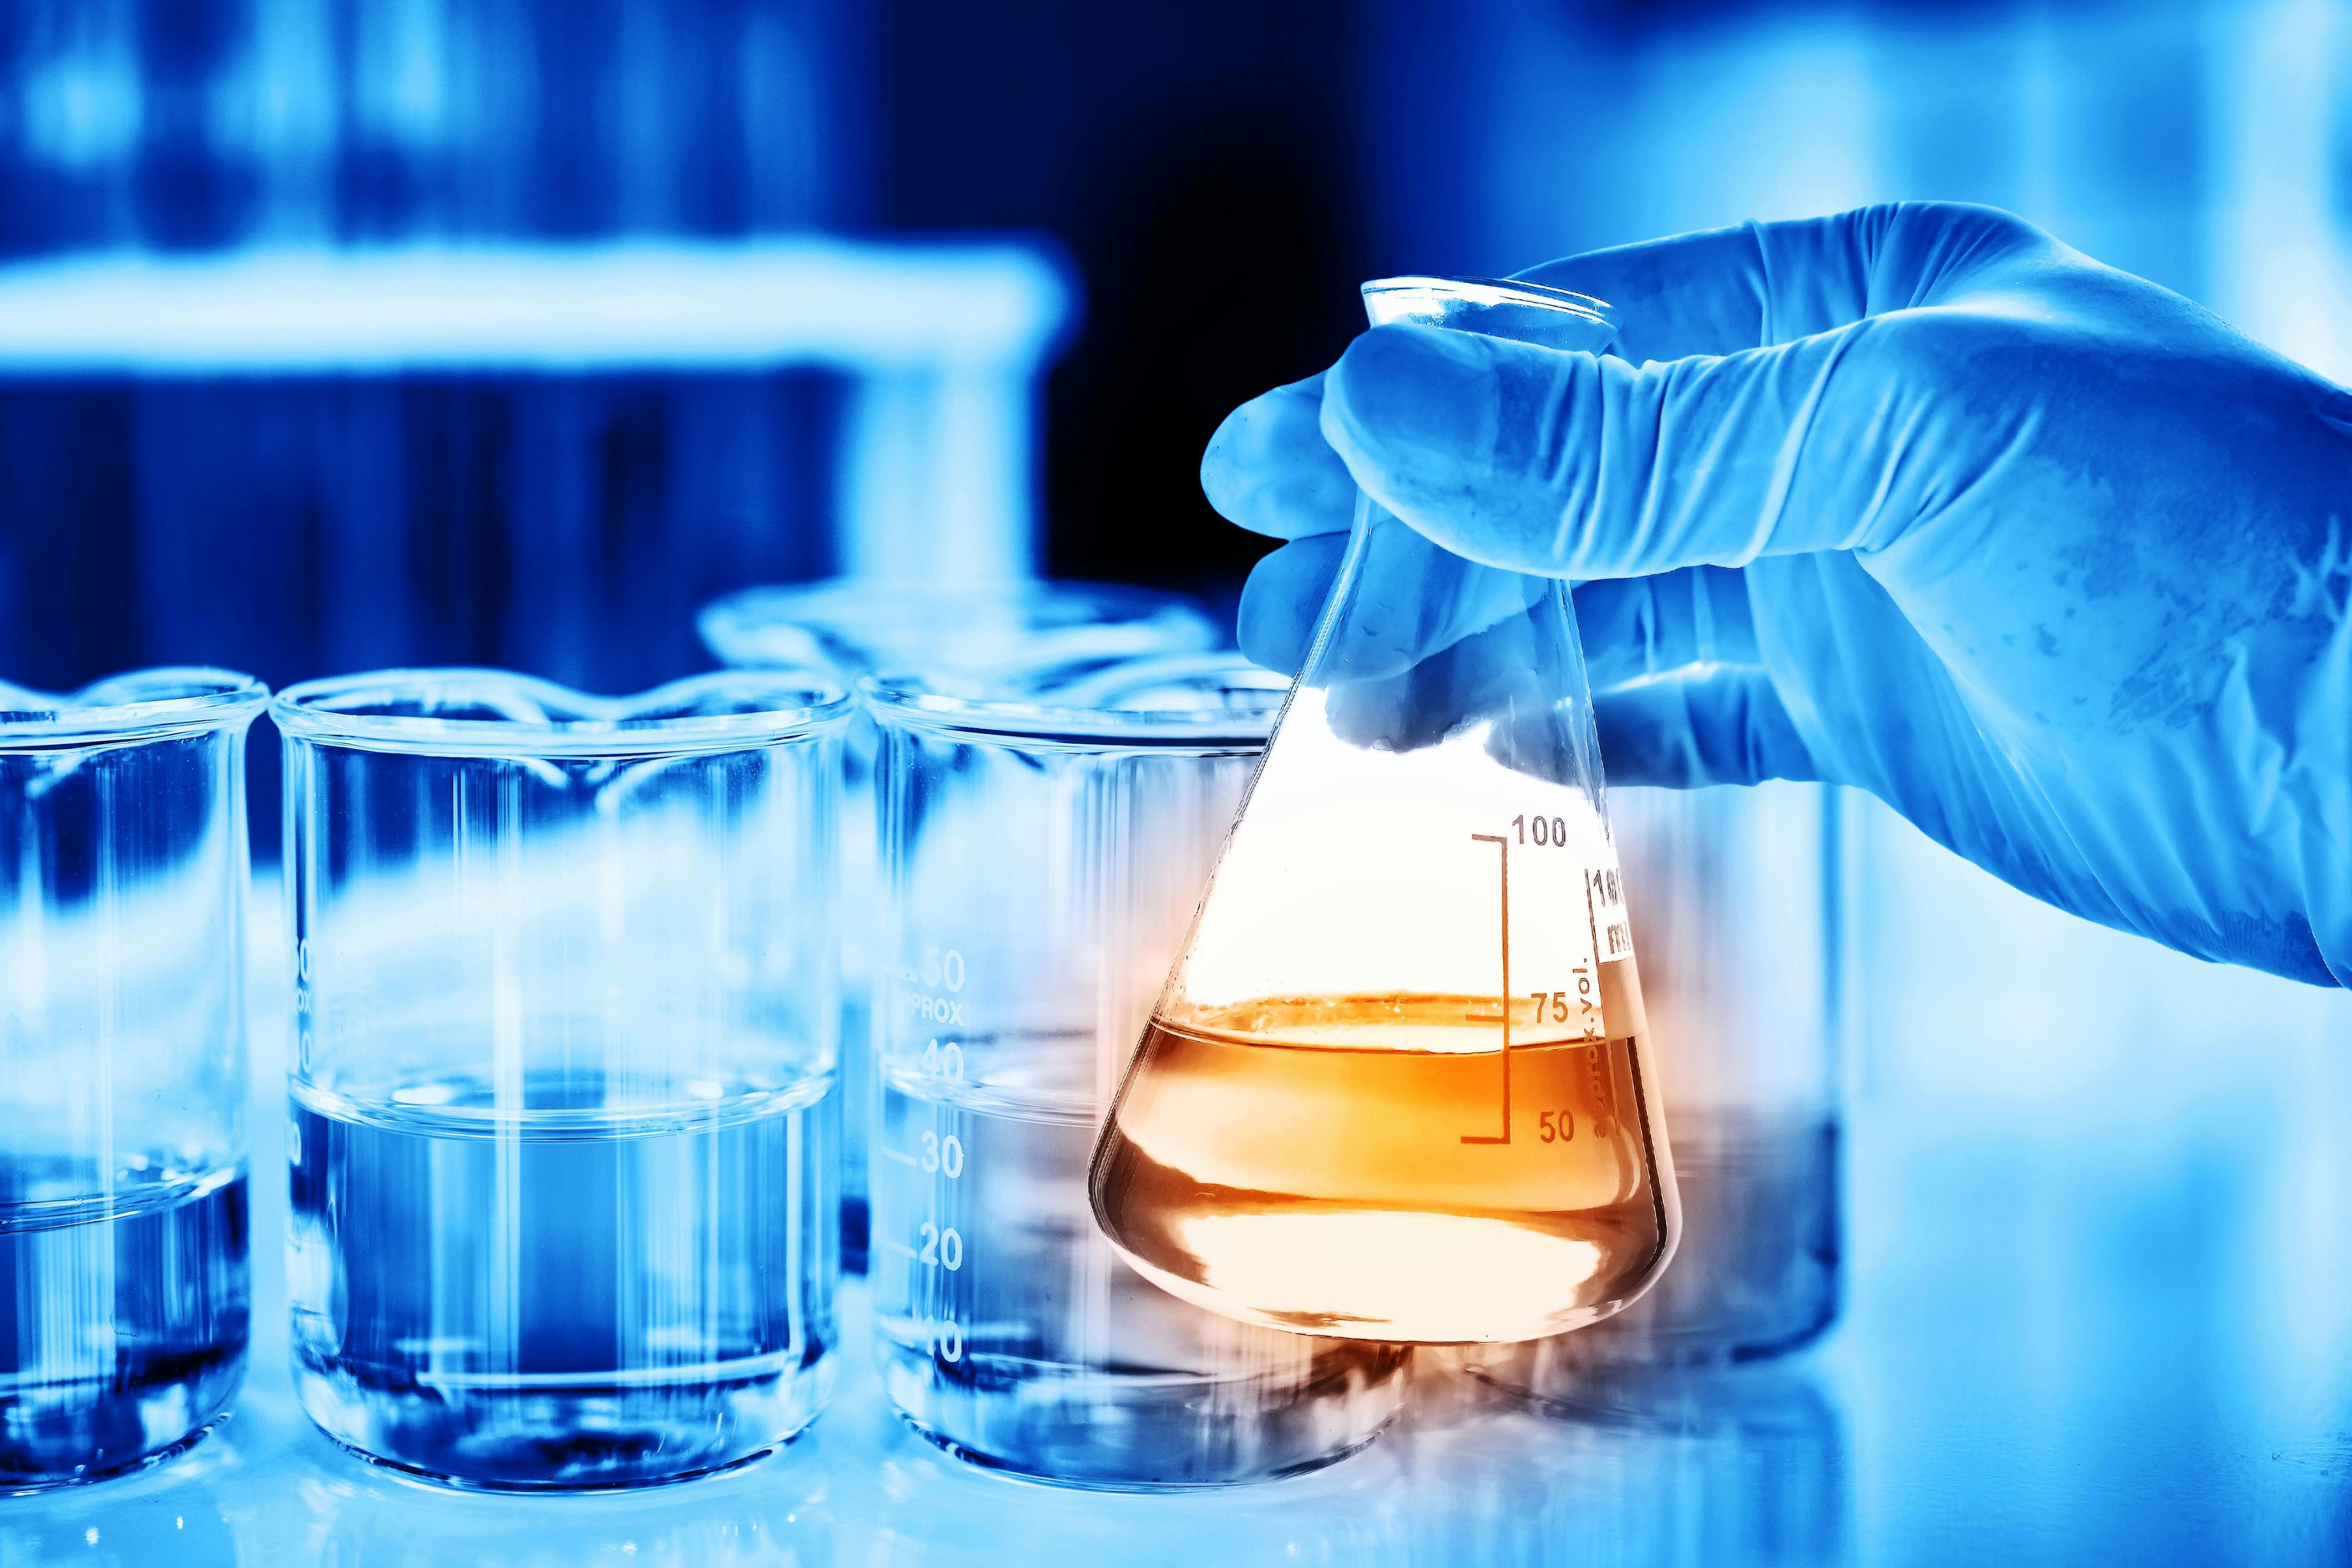 Flask in scientist hand with lab glassware background in laboratory. Science or chemical research and development concept. | Image Credit: © totojang1977 - stock.adobe.com.